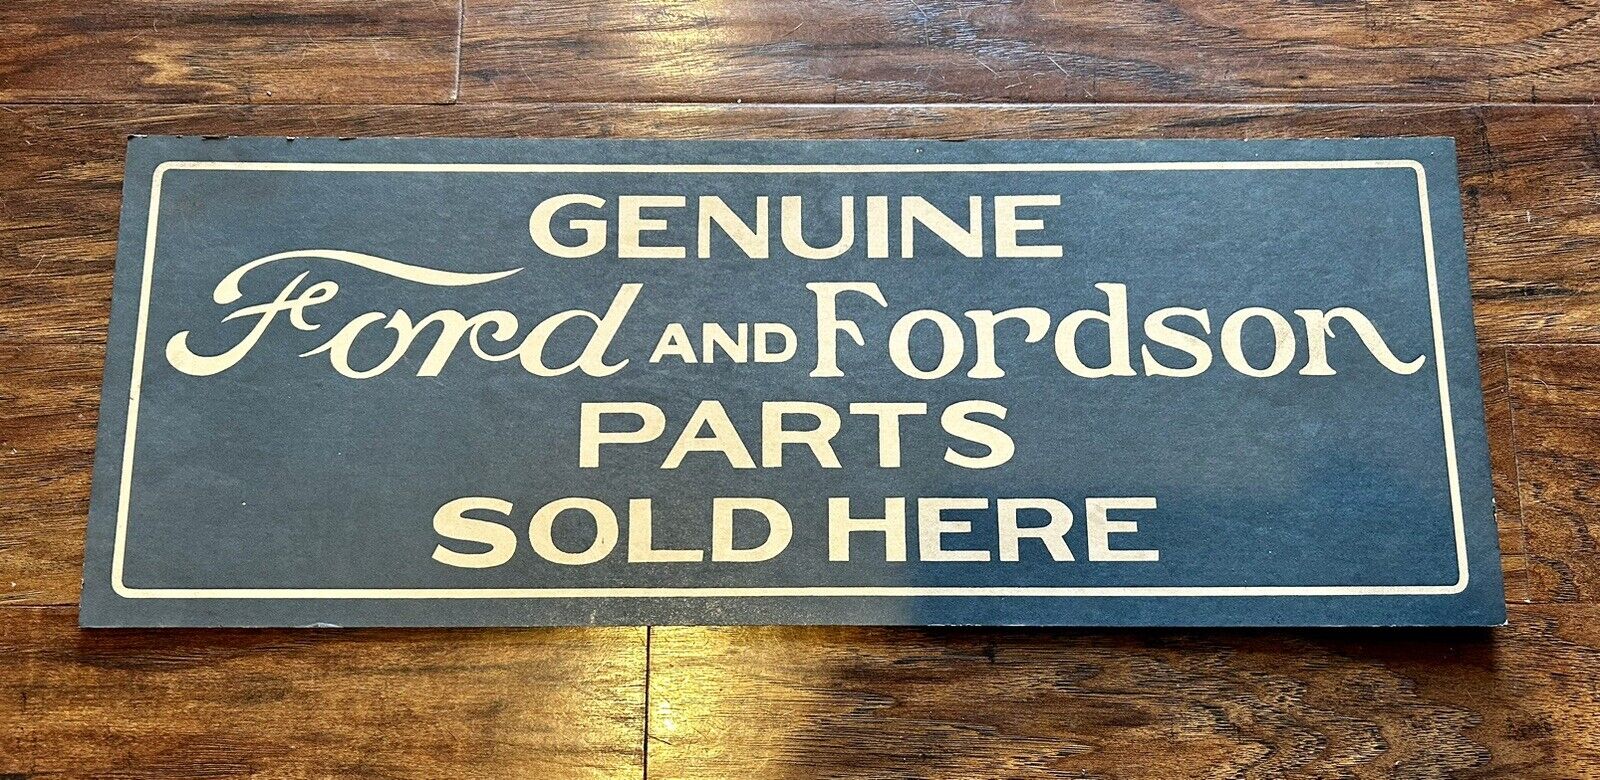 GENUINE FORD AND FORDSON PARTS SOLD HERE: THICK CARDBOARD SIGN, RARE